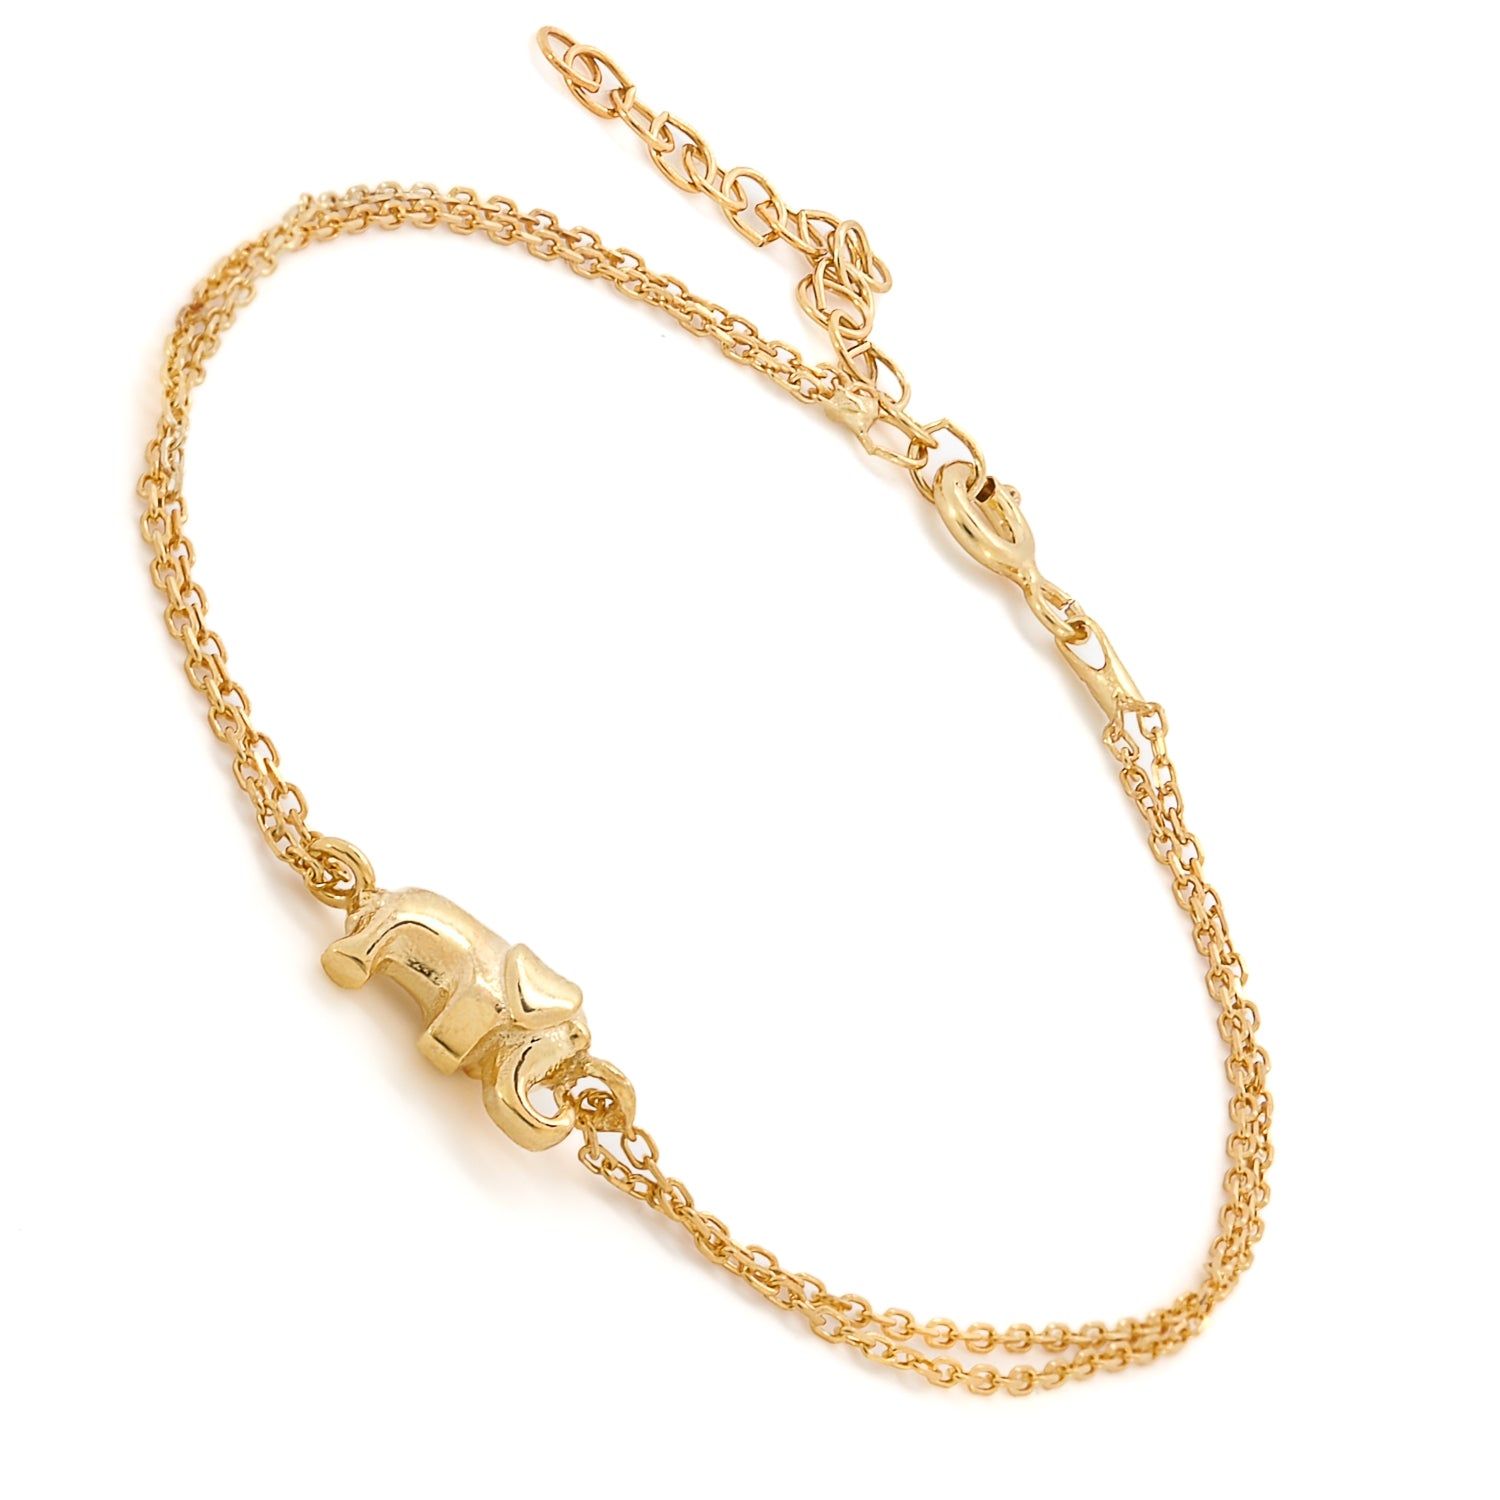 LUCKY ELEPHANT ANKLE BRACELET GOLD COLOUR ANKLET CHAIN & PRETTY GIFT BAG